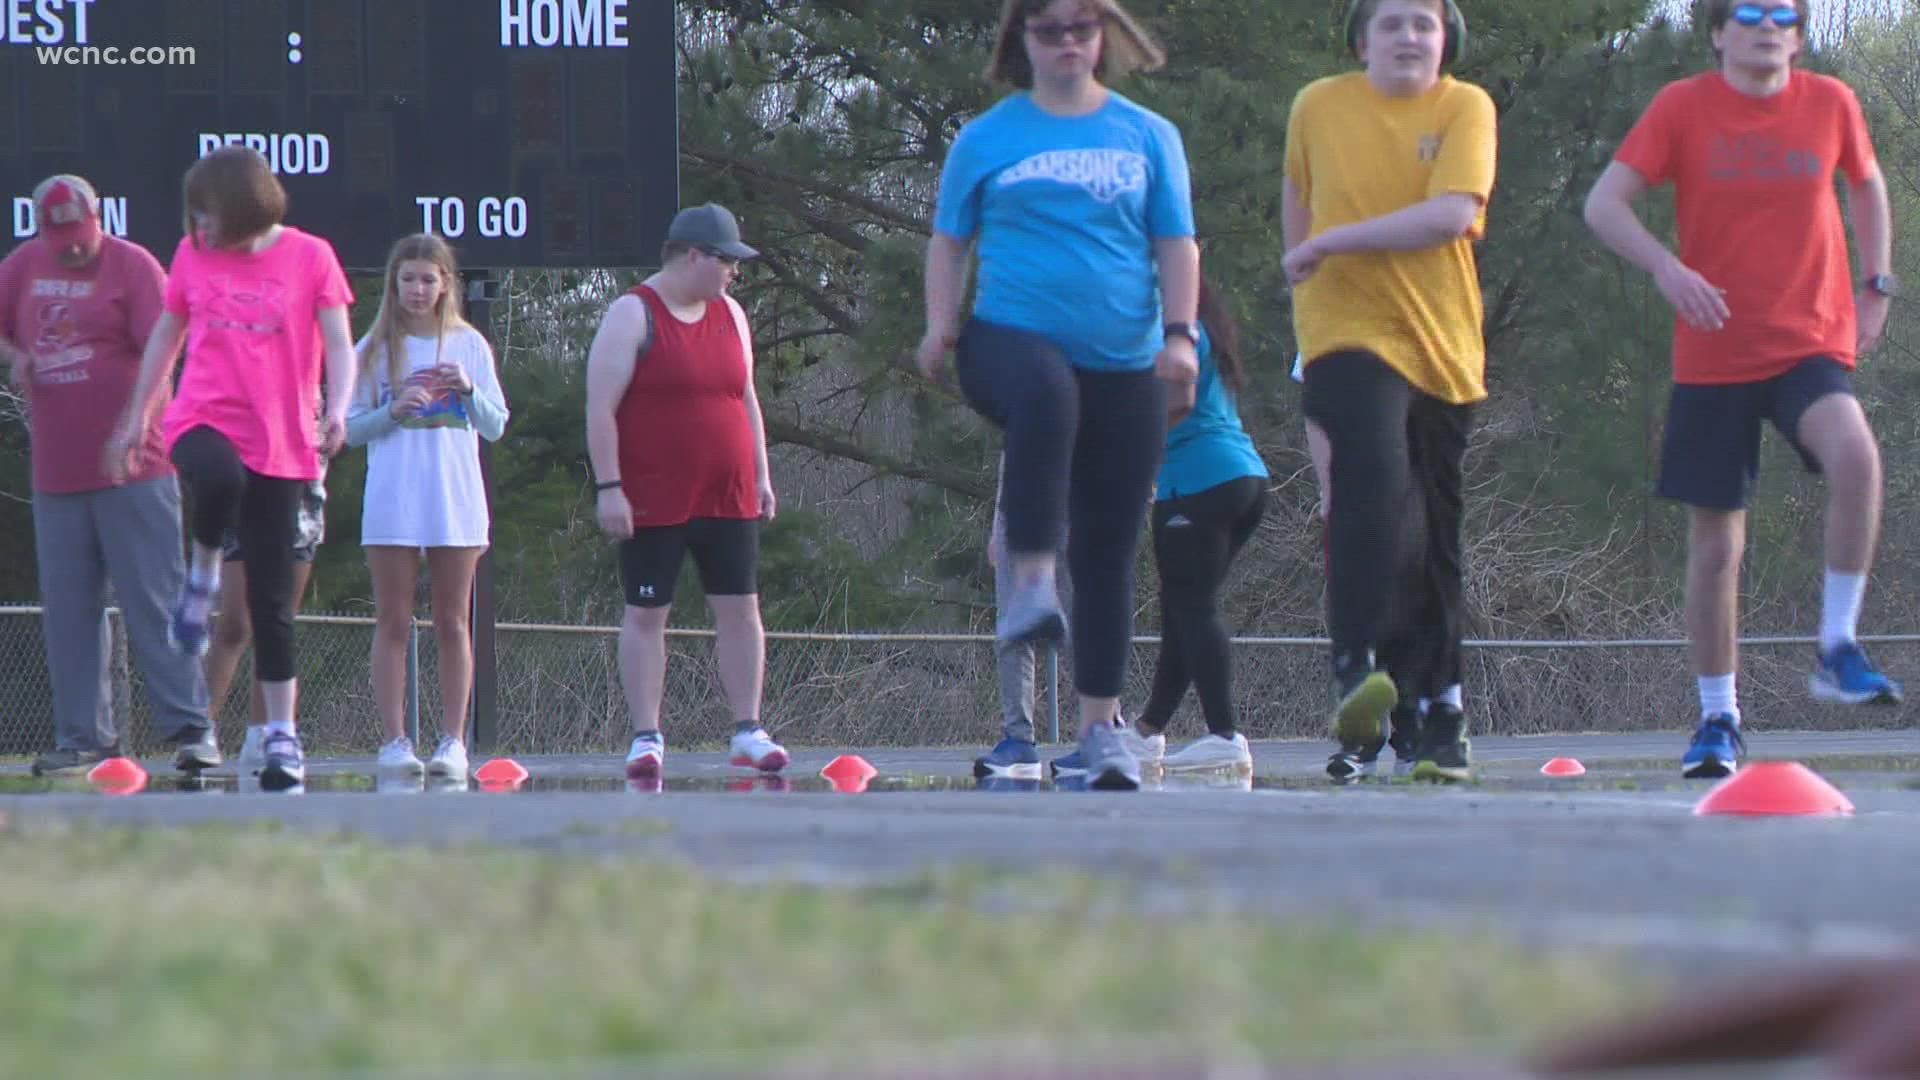 For the first time in two years, athletes will compete in a Special Olympics track and field event in Cabarrus County.